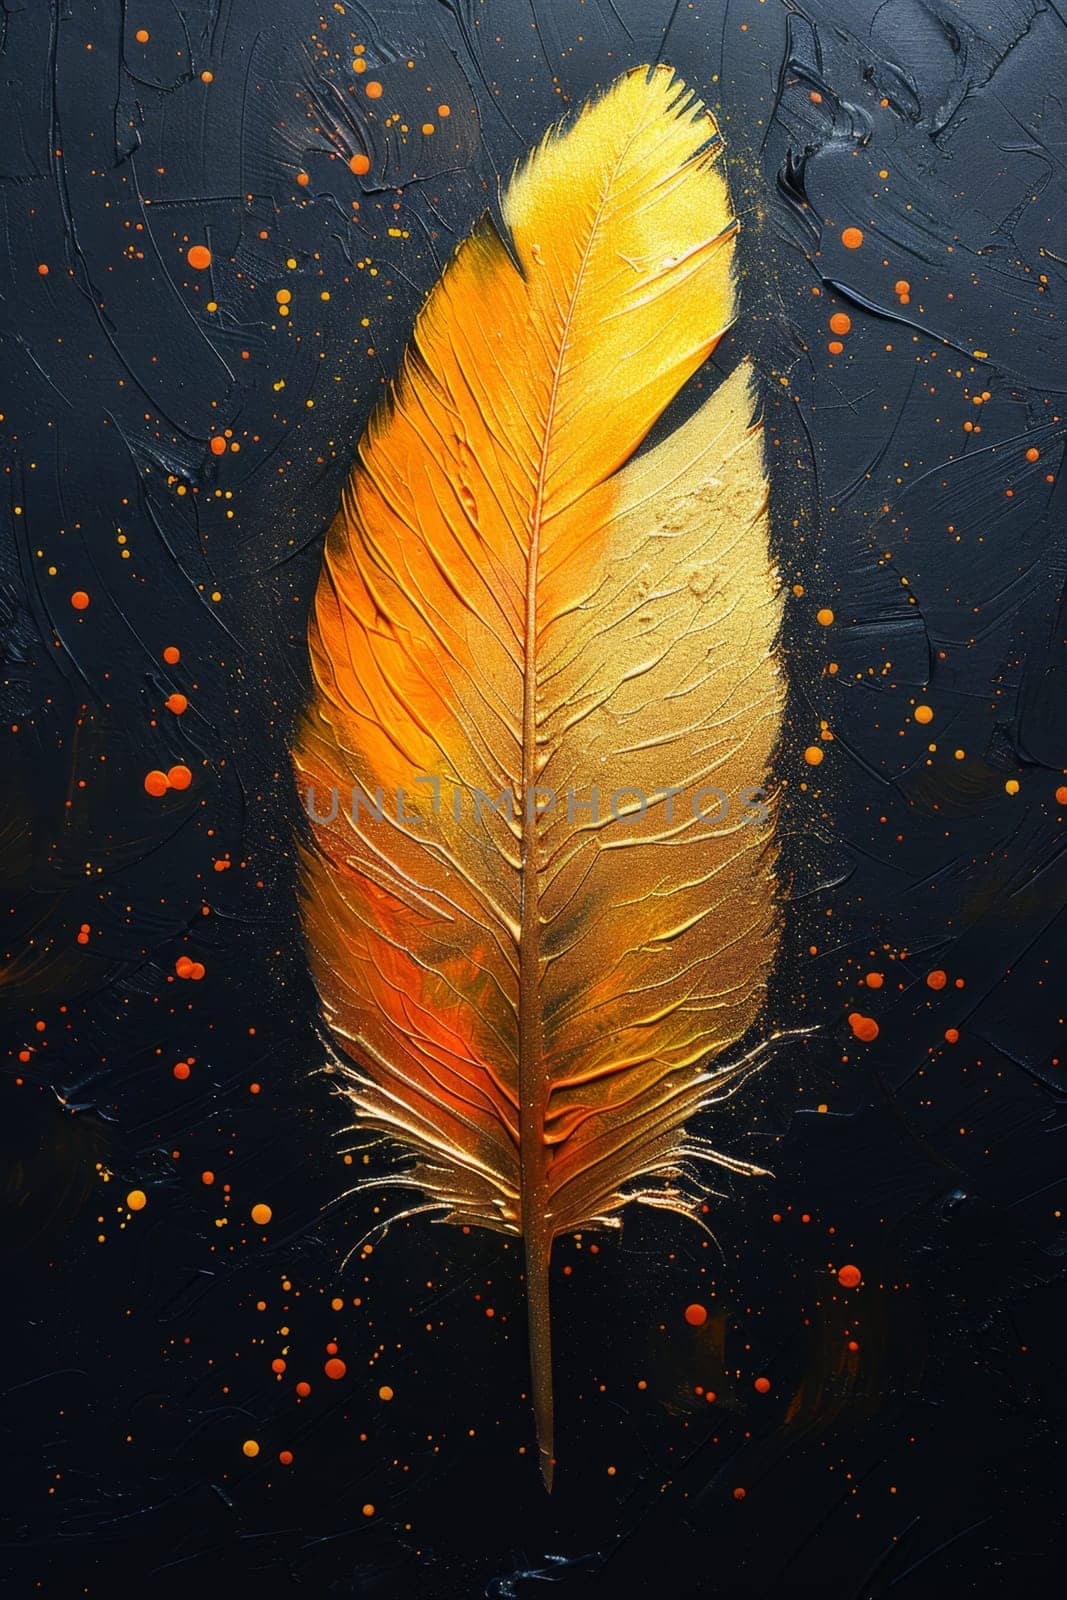 One golden feather highlighted on a black background. Illustration.